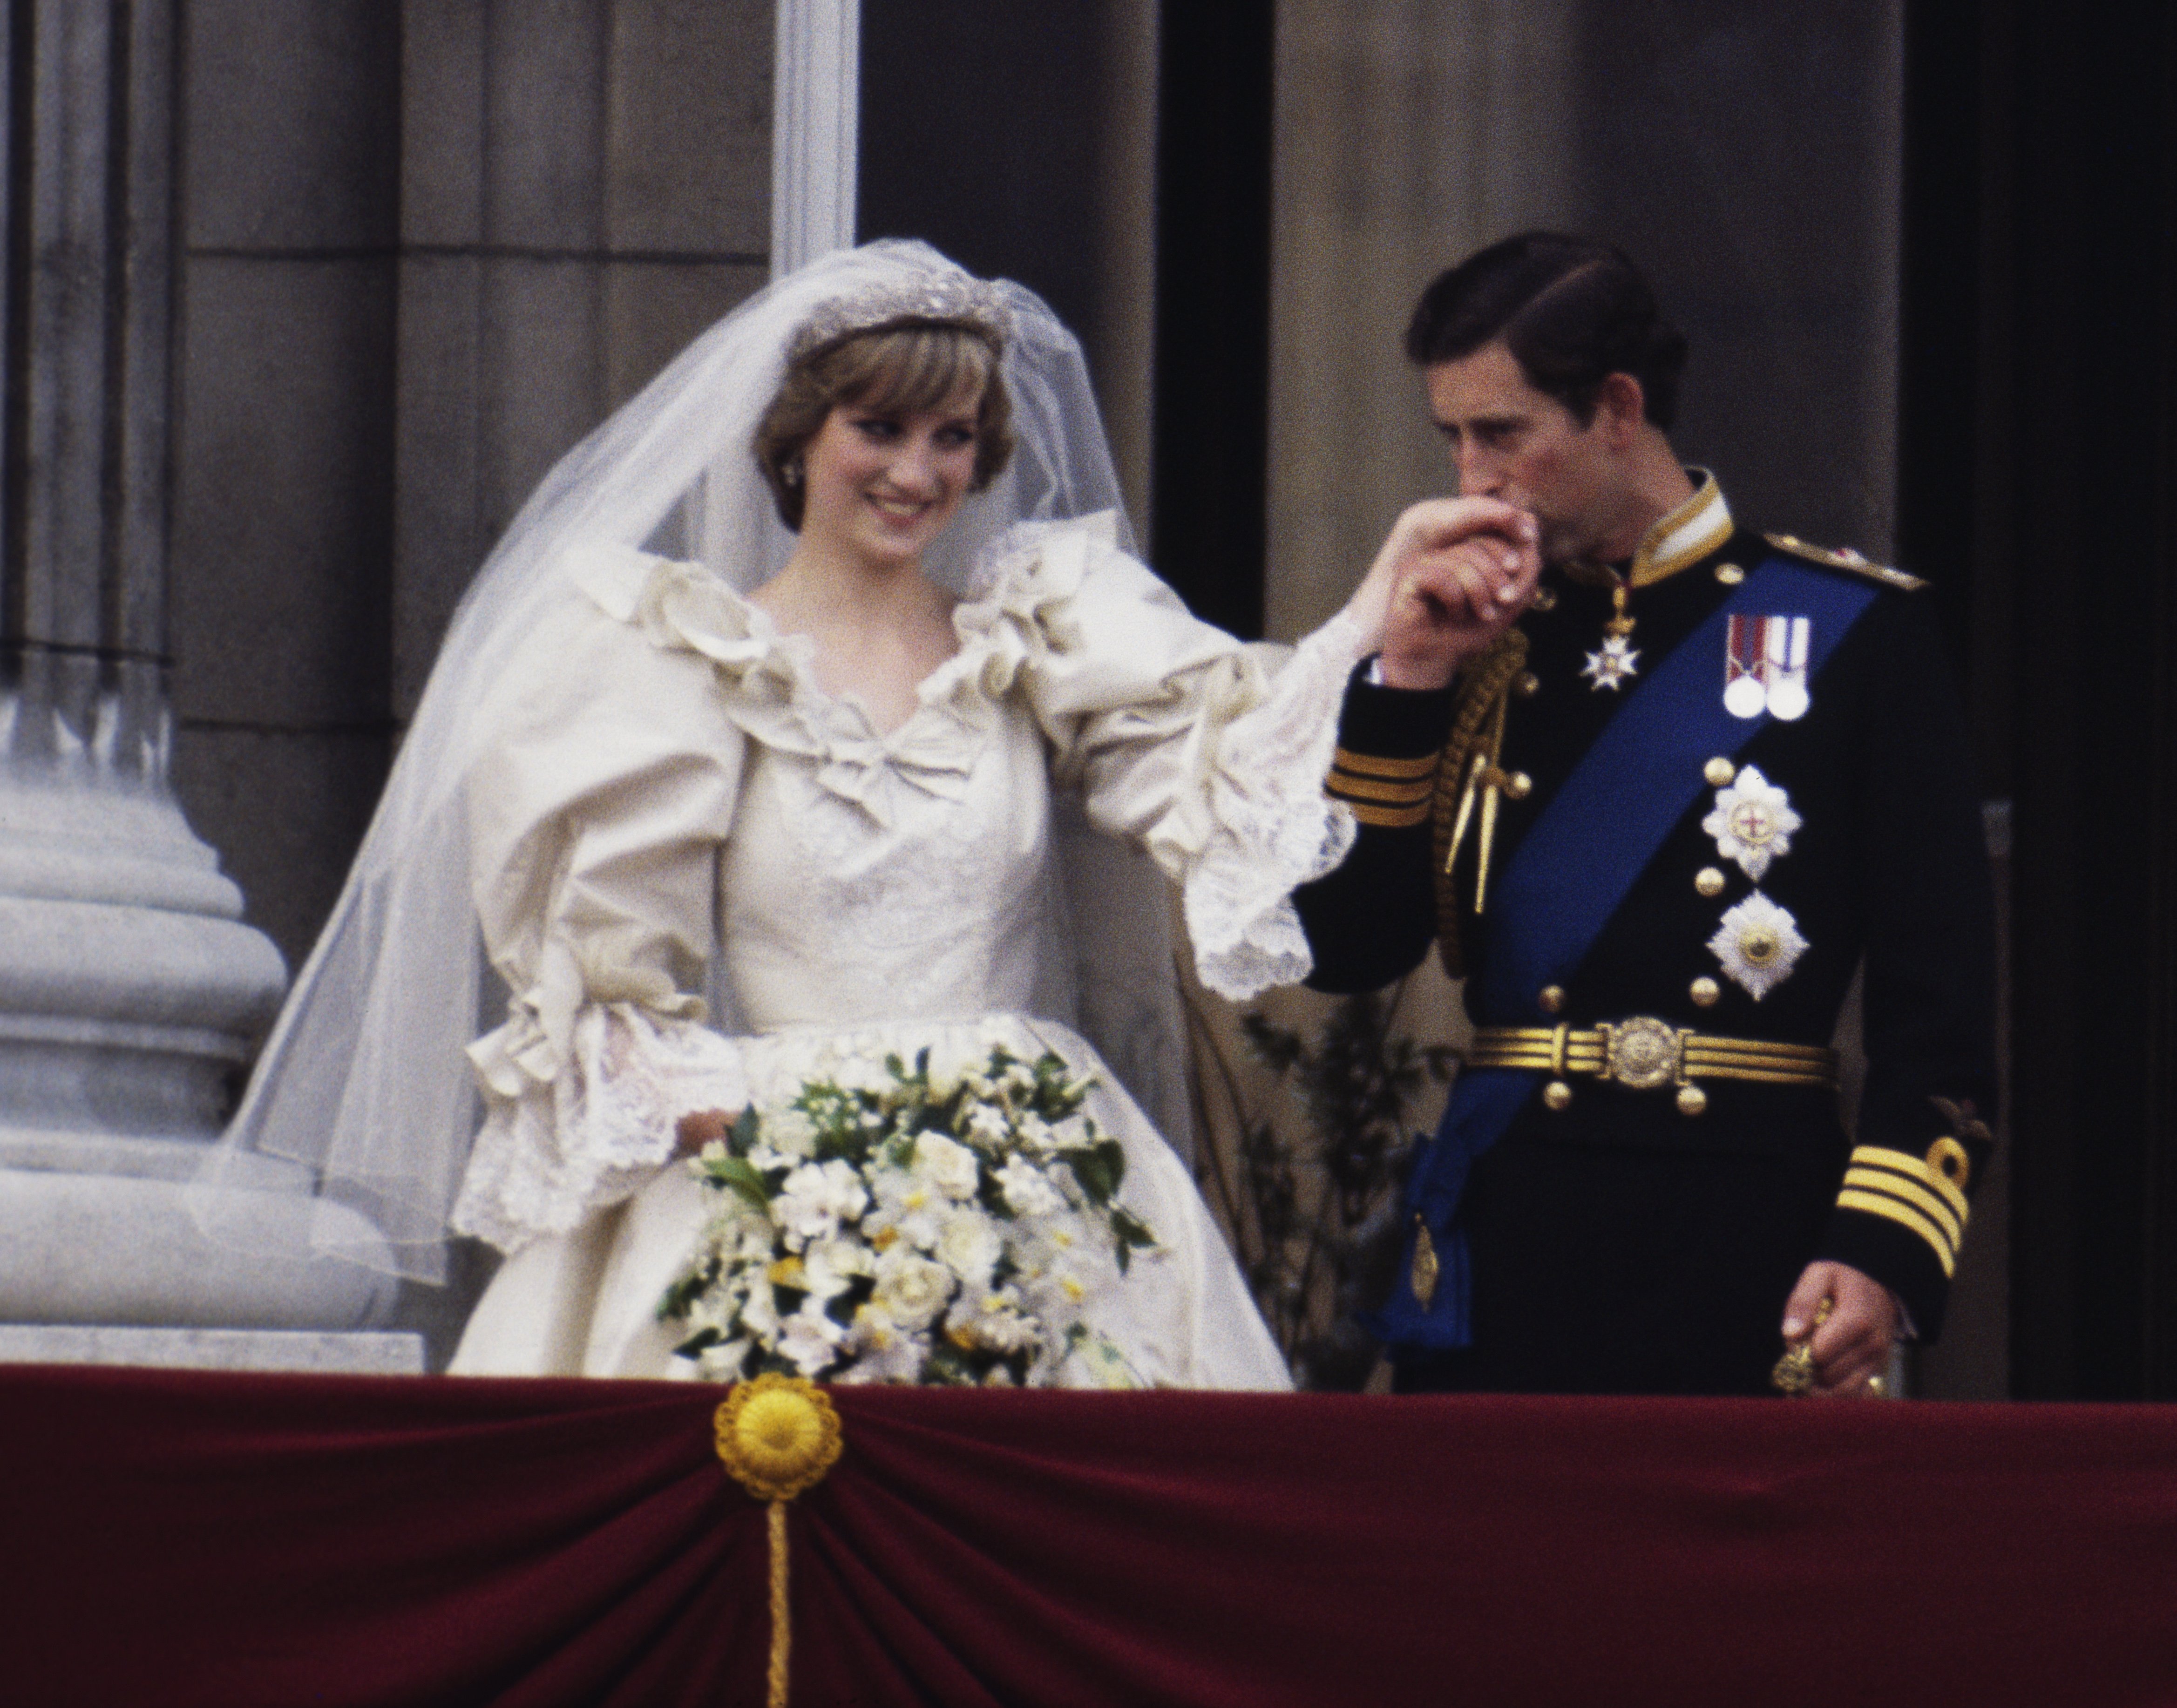 Diana, Princess of Wales, with her newly-wedded husband, Charles, the Prince of Wales, on the balcony of Buckingham Palace on their wedding day on July 29, 1981. | Source: Getty Images